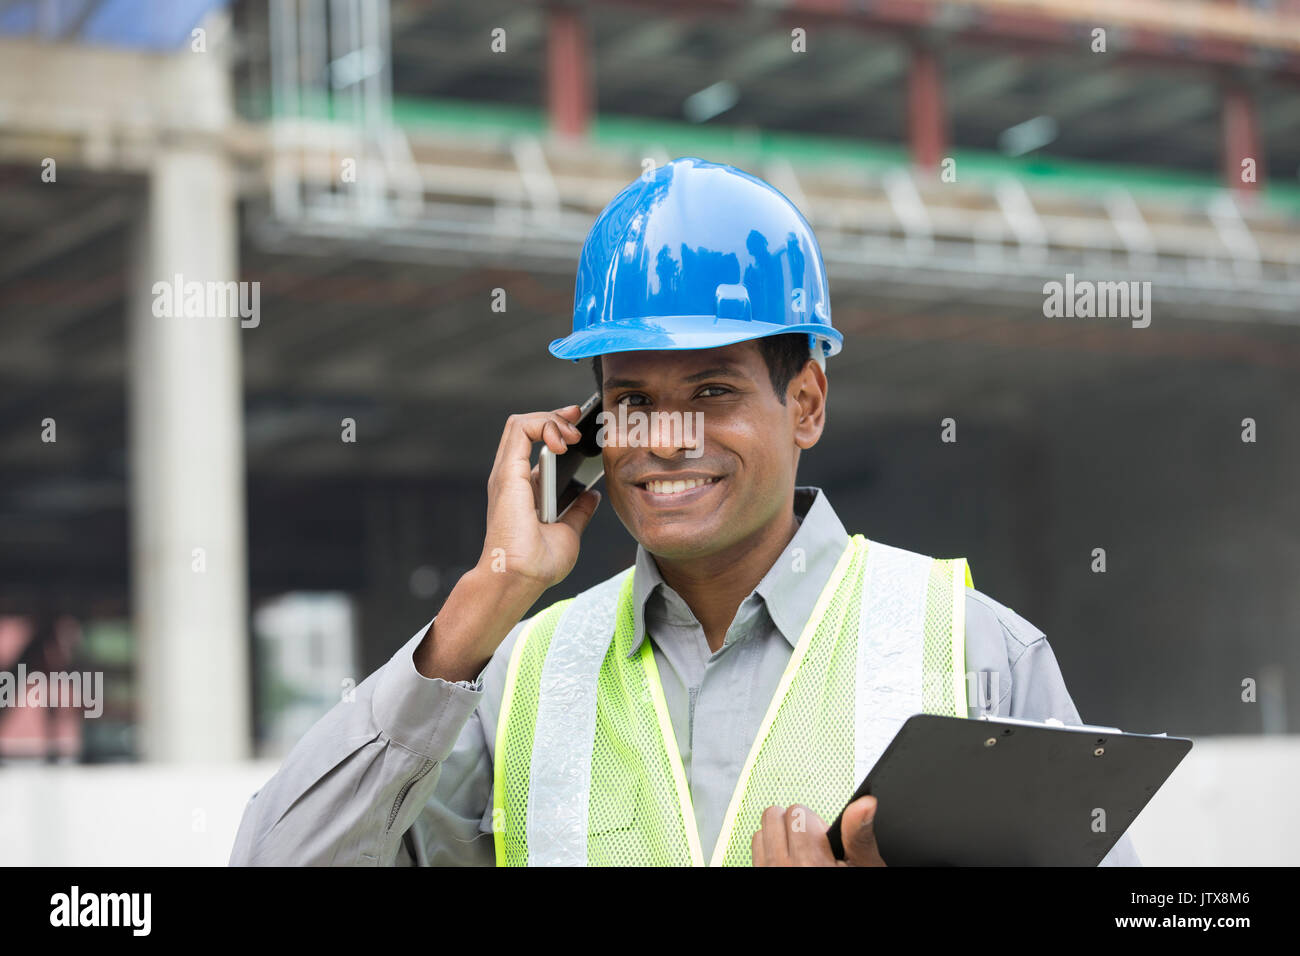 portrait-of-a-male-indian-builder-or-industrial-engineer-at-work-using-JTX8M6.jpg